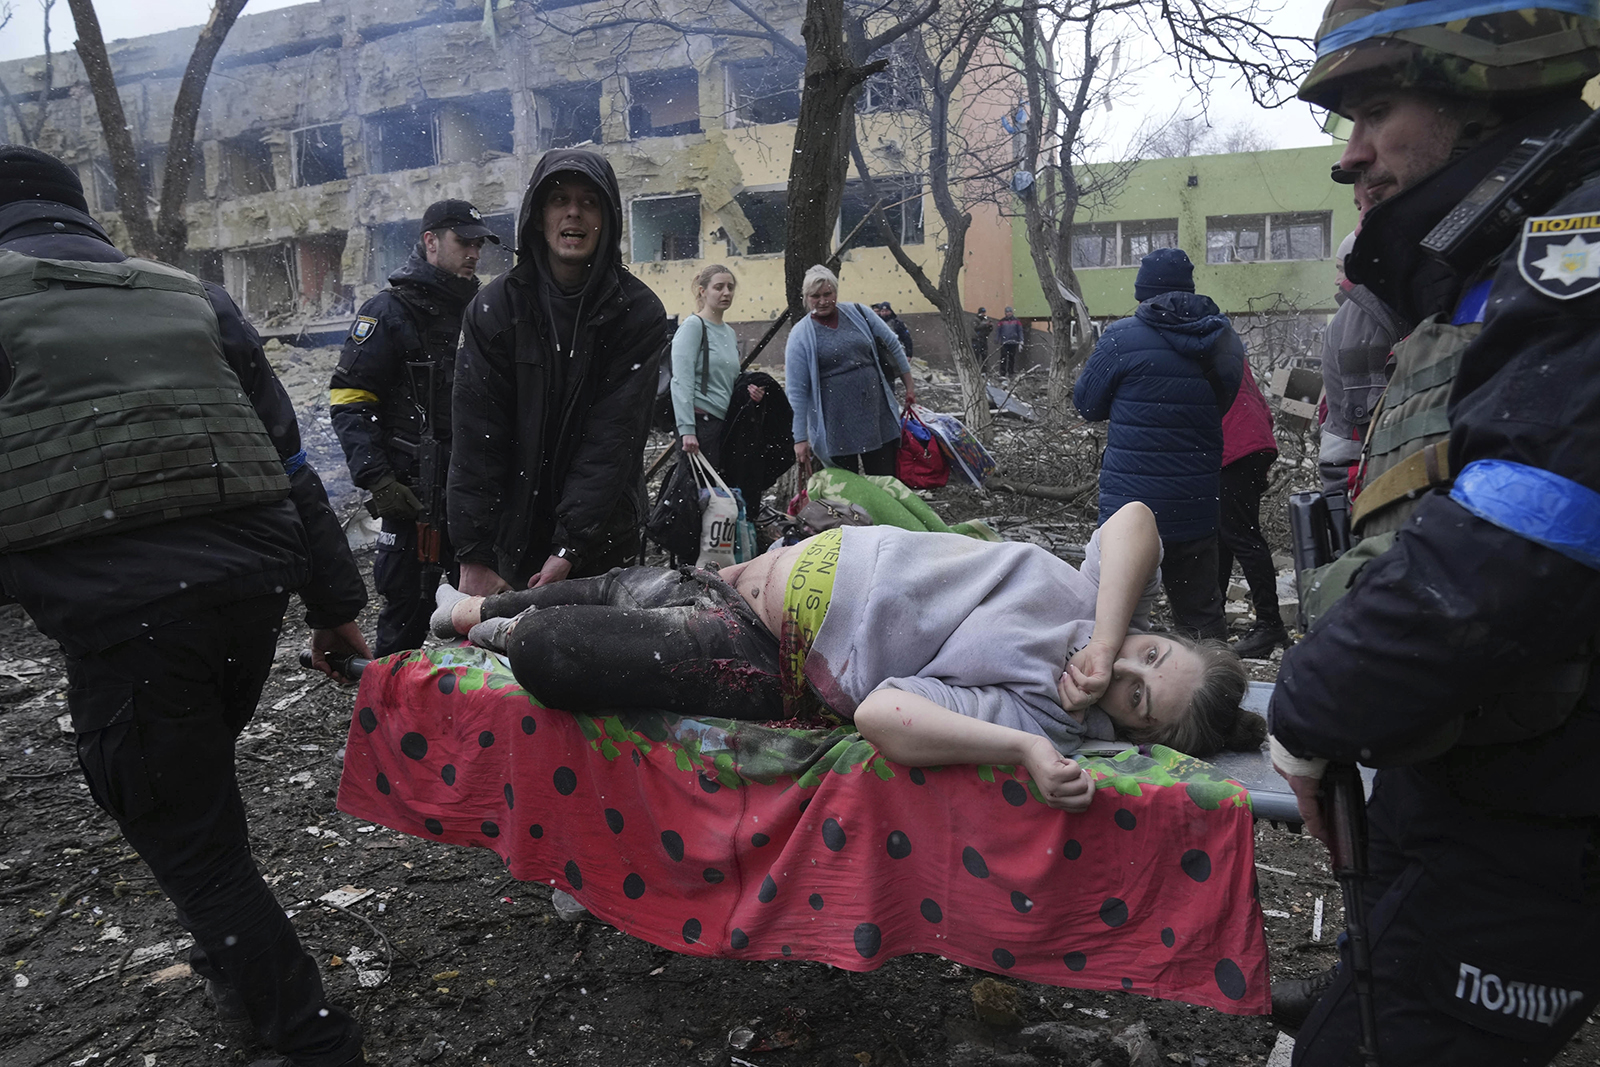 Ukrainian emergency employees and volunteers carry an injured pregnant woman from a maternity hospital in Mariupol, Ukraine, Wednesday, March 9, 2022. A Russian attack severely damaged a maternity hospital in the besieged port city of Mariupol, Ukrainian officials say. (AP Photo/Evgeniy Maloletka)